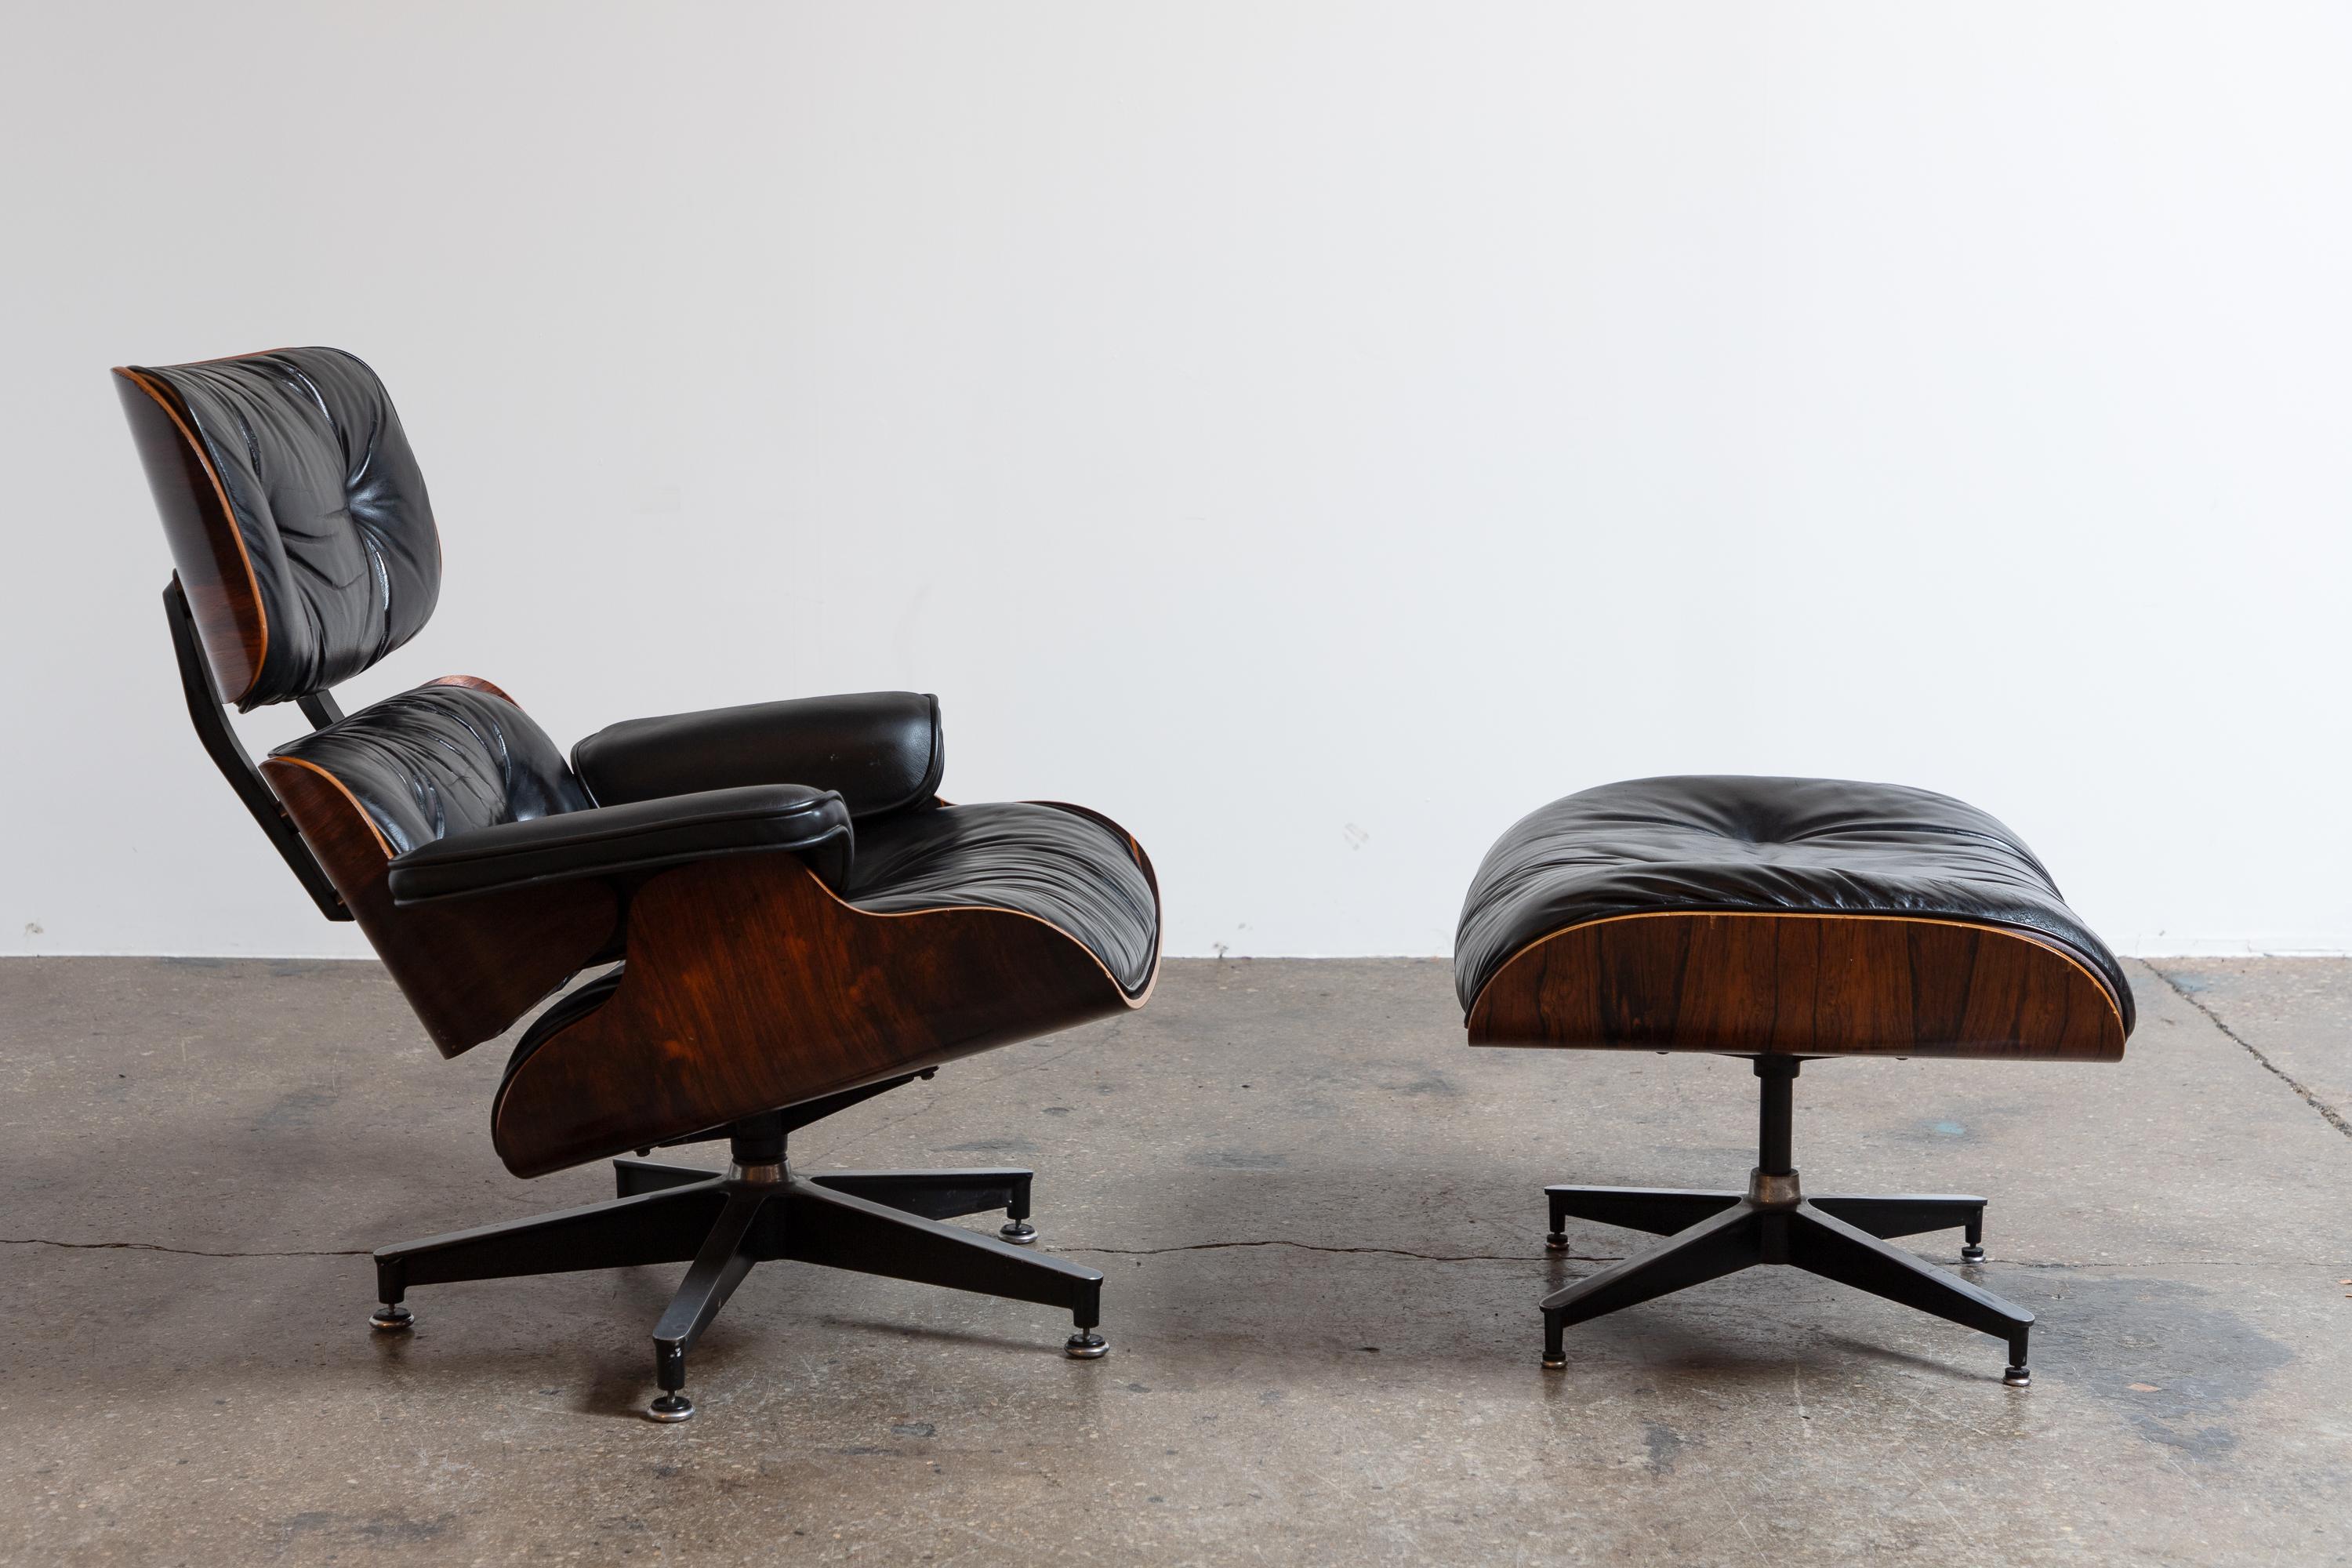 Iconic 670 lounge chair, paired with matching 671 ottoman, in Brazilian rosewood and black leather, designed by Charles and Ray Eames for Herman Miller. Gleaming frame showcases gorgeous rosewood veneer. Upholstery is in good condition, free of any